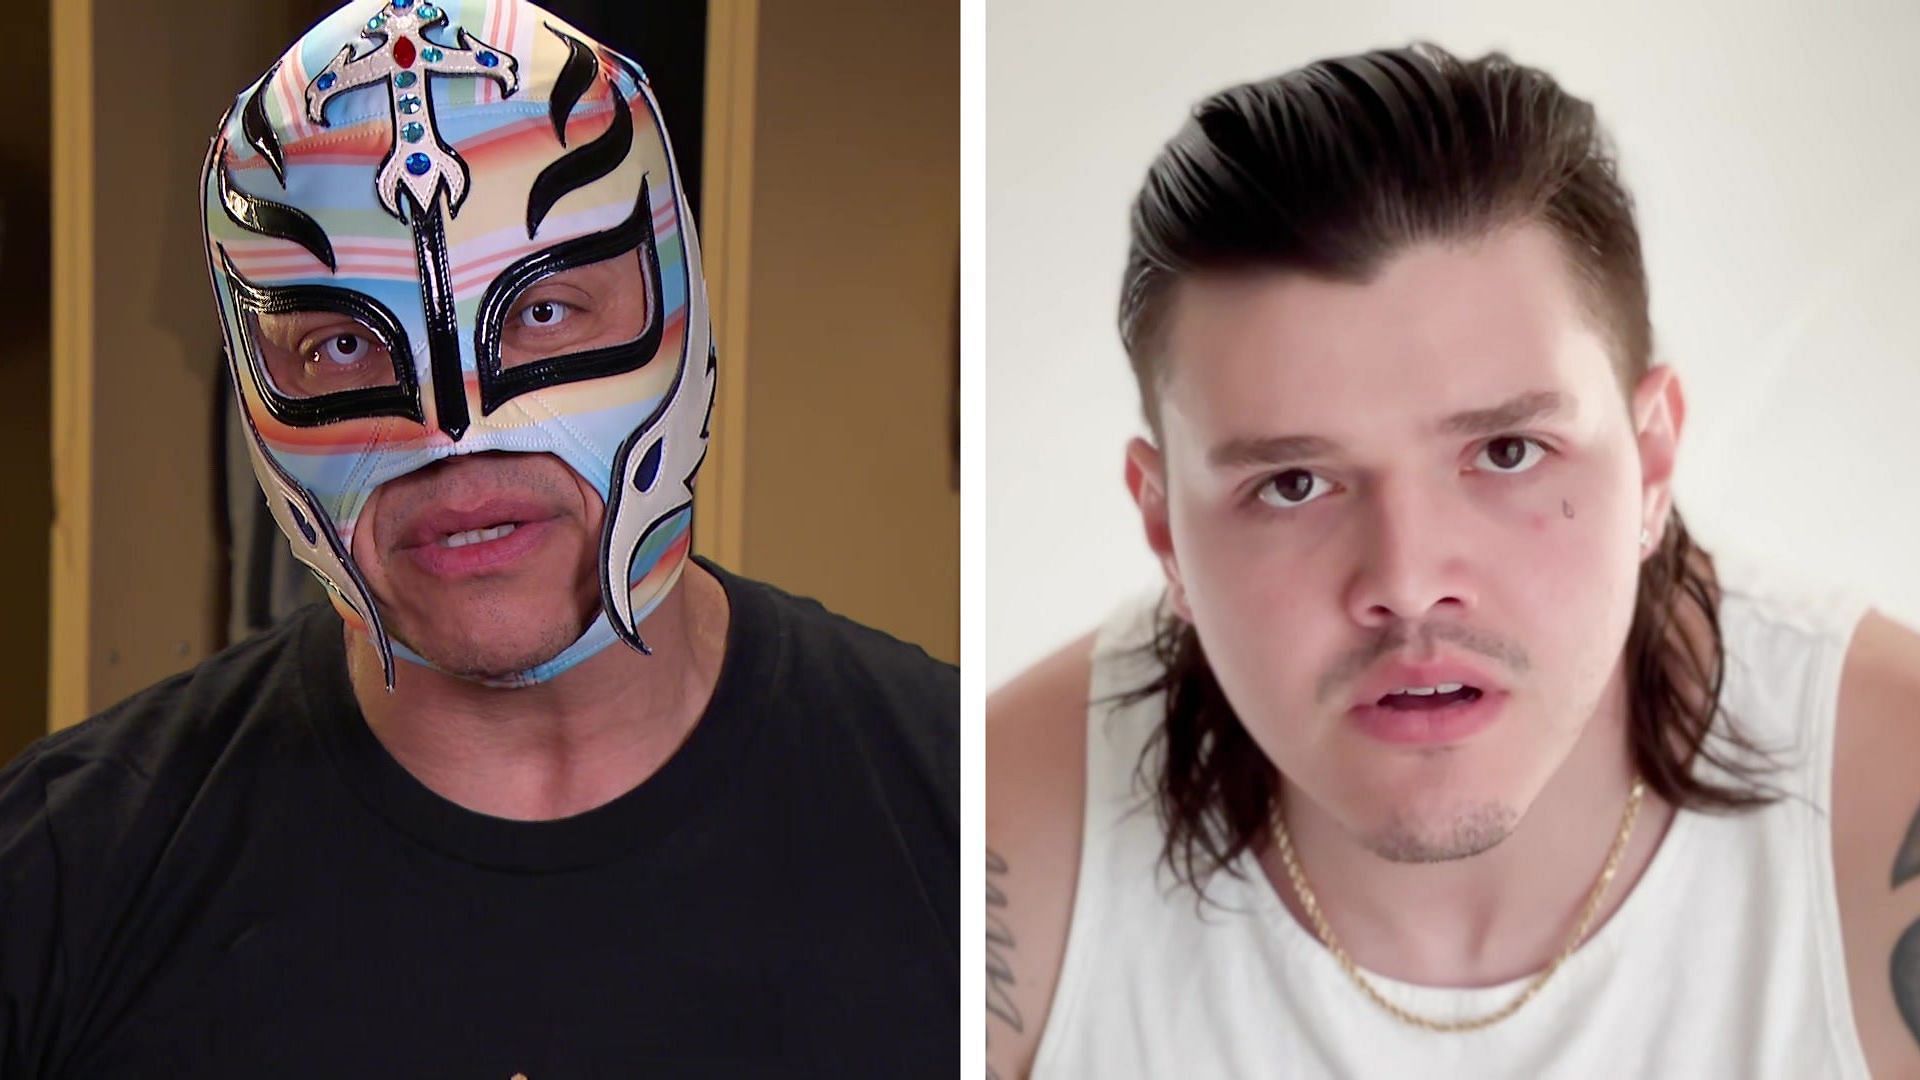 Rey Mysterio refuses to fight Dominik in a WWE ring